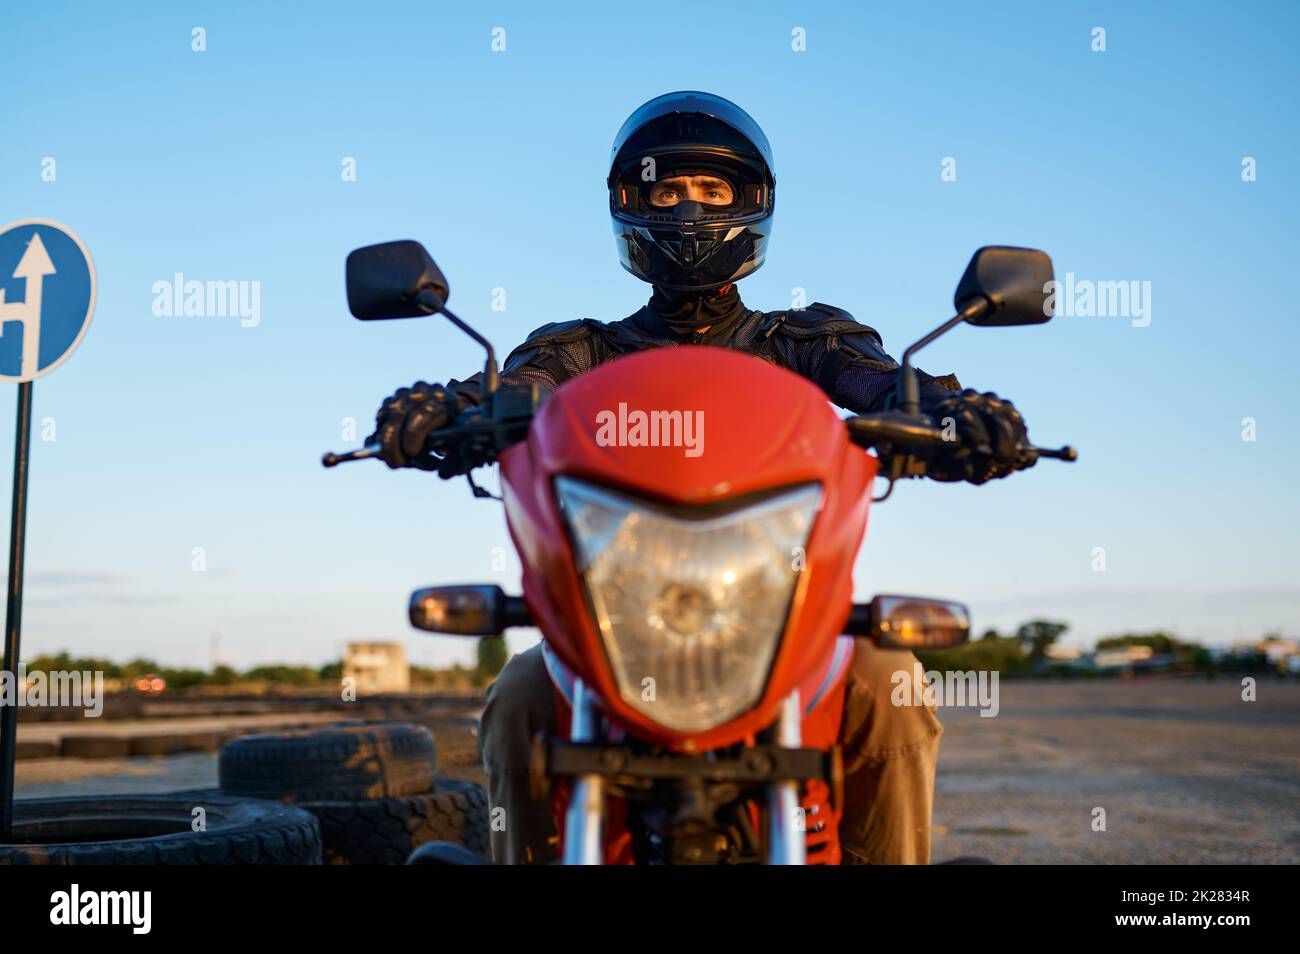 Man on motorbike, front view, motorcycle school Stock Photo